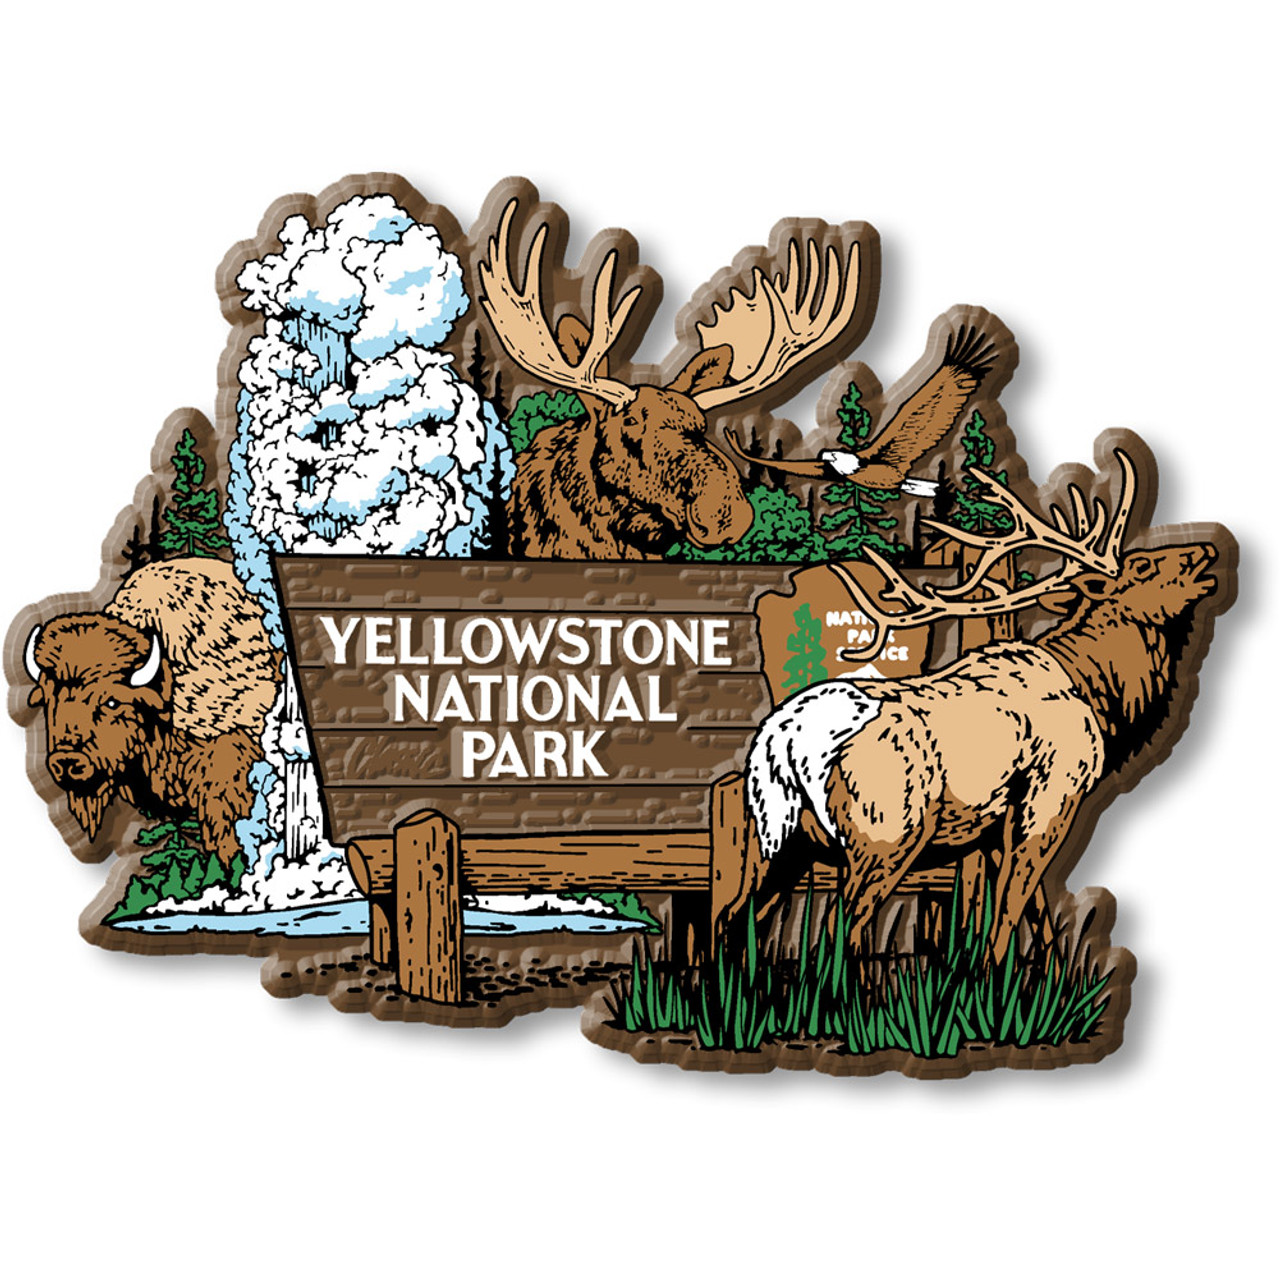 https://cdn11.bigcommerce.com/s-7prhr/images/stencil/1280x1280/products/4284/15701/RGL-YS1-Yellowstone-NP-Sign-Magnet__57510.1658767601.jpg?c=2